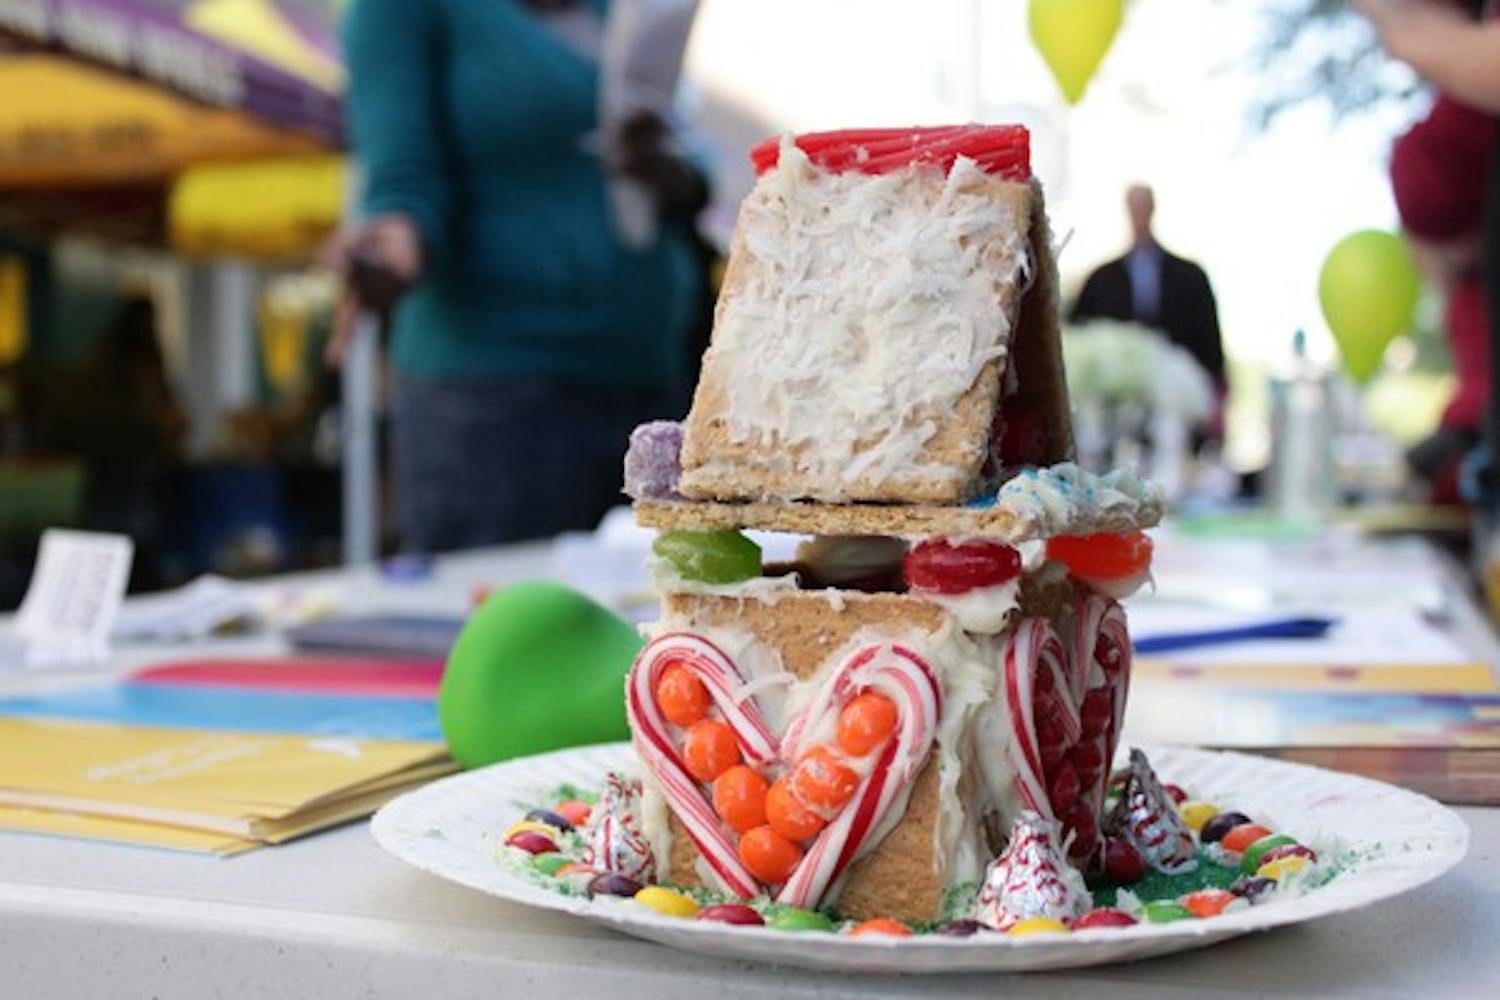 Students made gingerbread houses out of graham crackers and decorated them with delicious holiday candy as part of the “Freak out for Finals” event on the Downtown campus. (Photo by Beth Easterbrook)